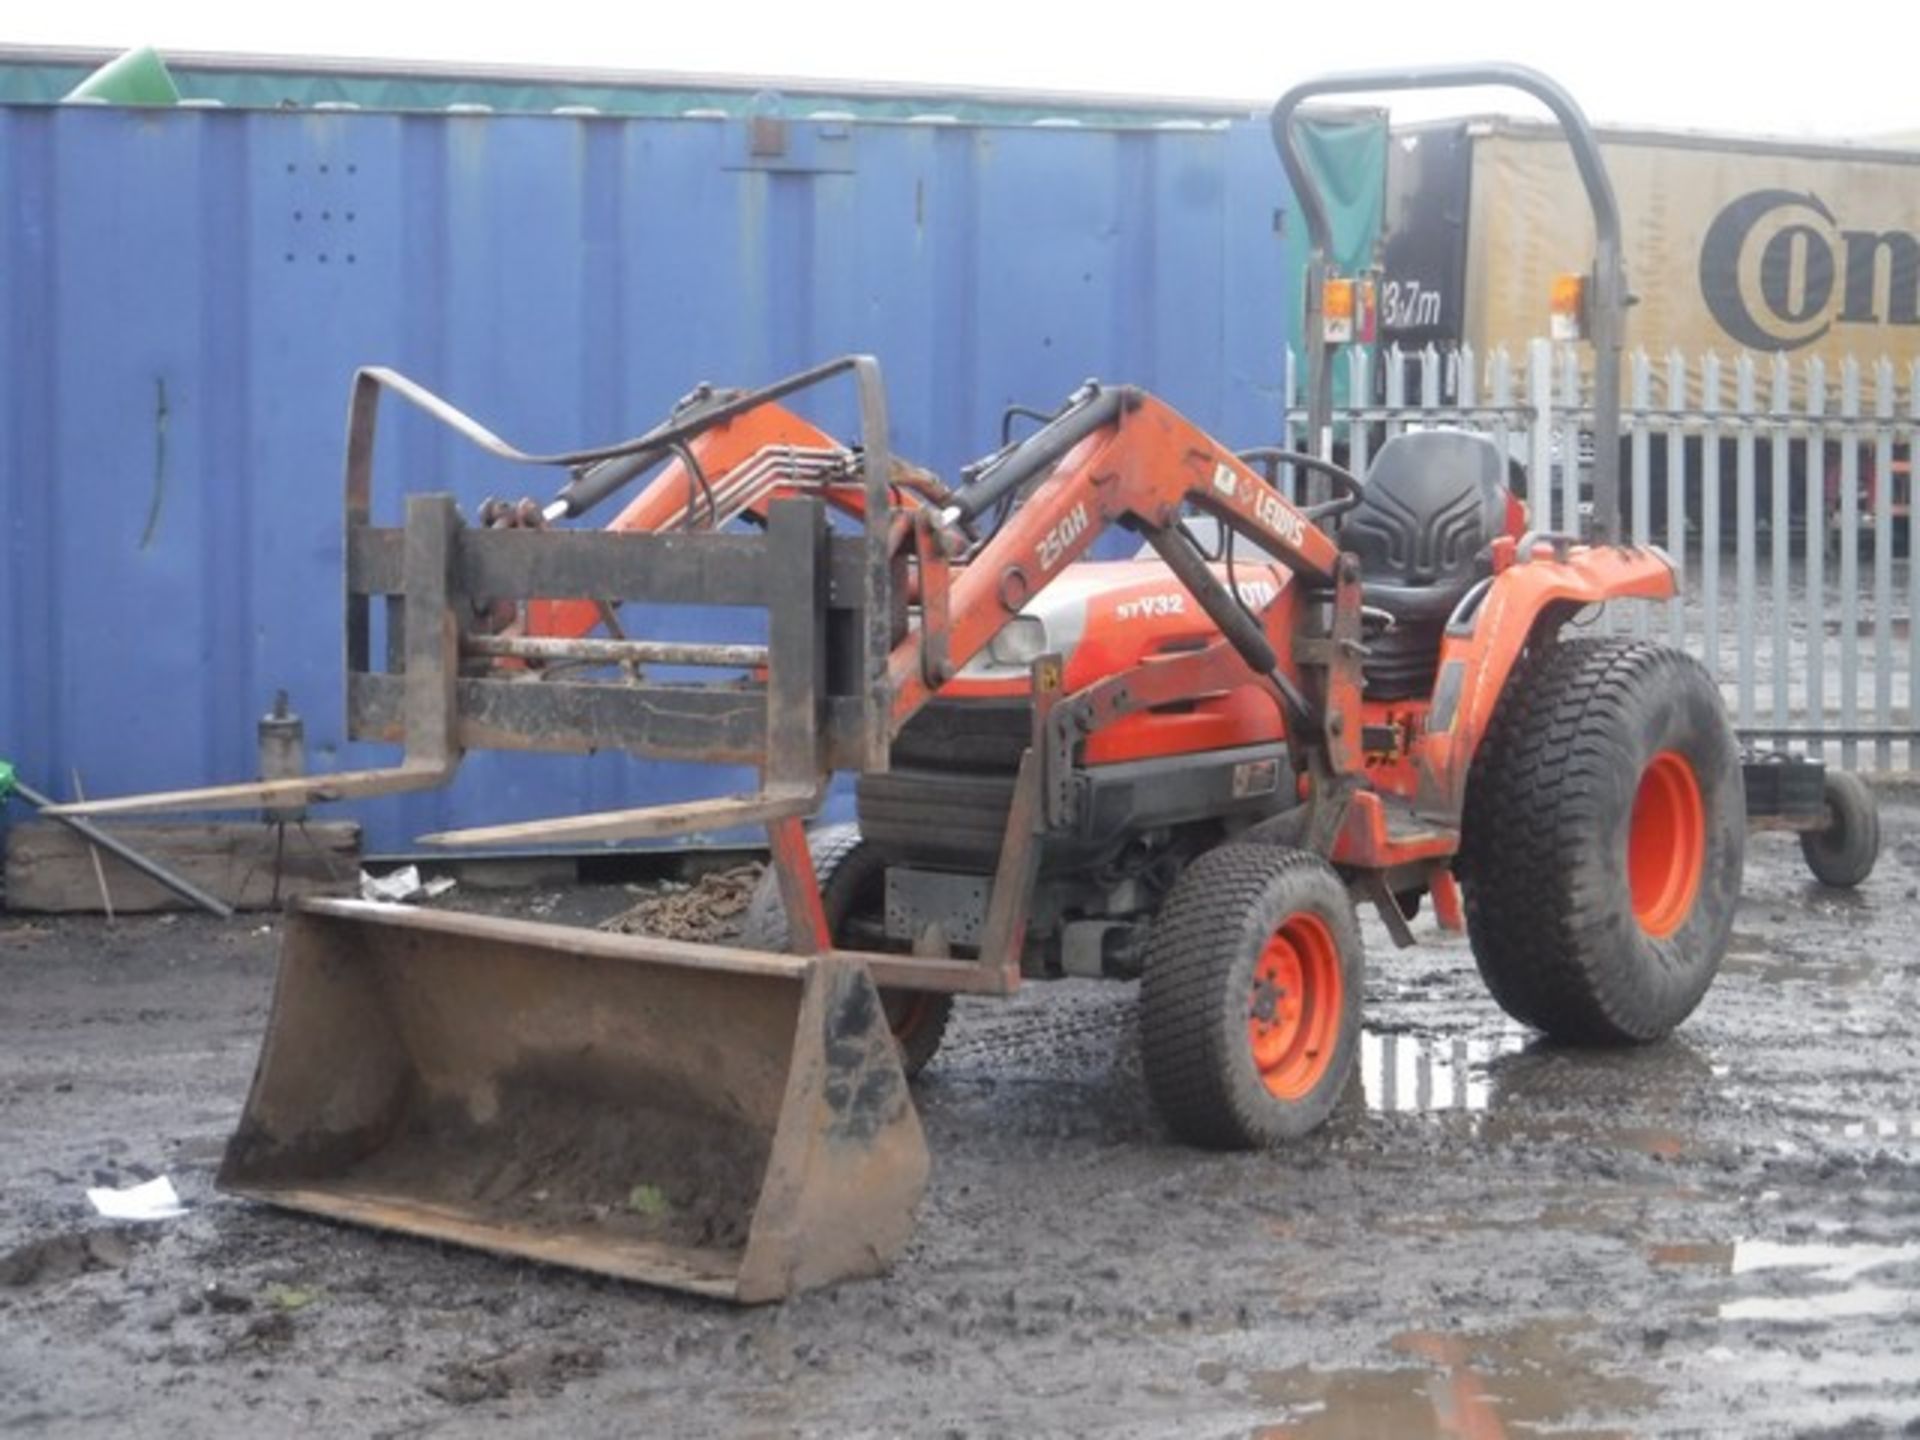 KUBOTA STV32 TRACTOR C/W LEWIS 25QH FRONT LOADER, FORKS AND BUCKET, REAR PTO 1954 HRS (NOT VERIFIED)